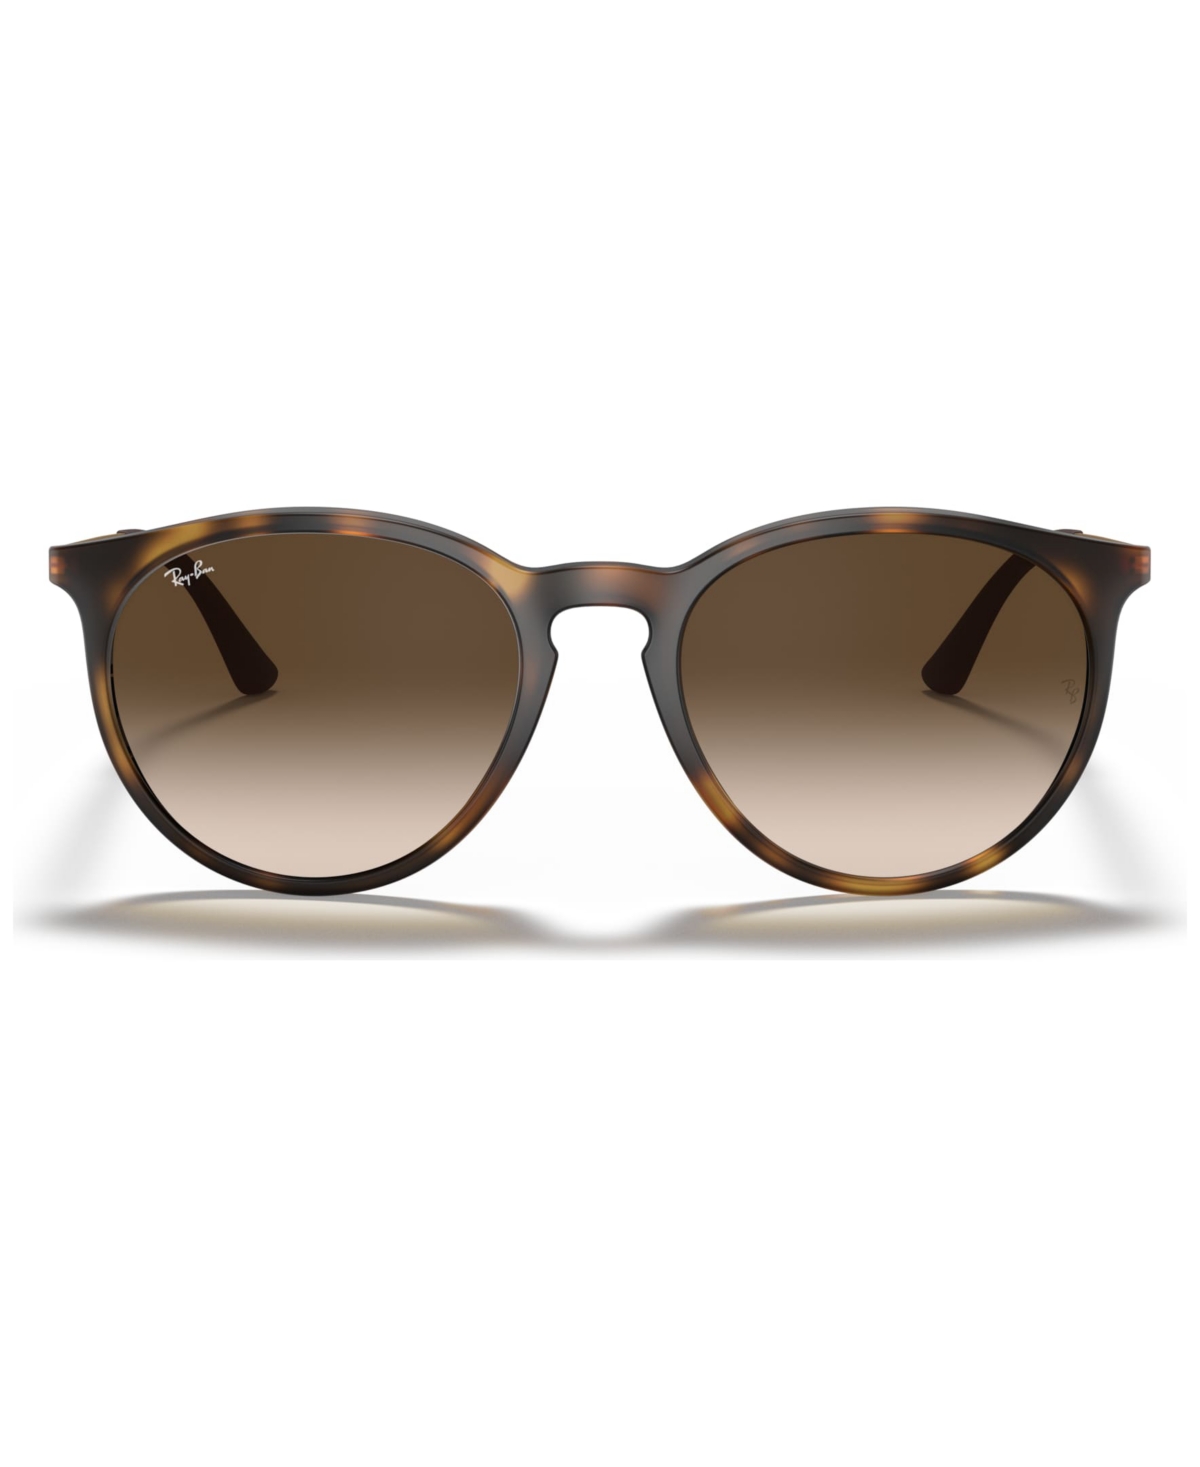 Ray Ban Polarized Sunglasses, Rb4274 In Tortoise,brown Gradient